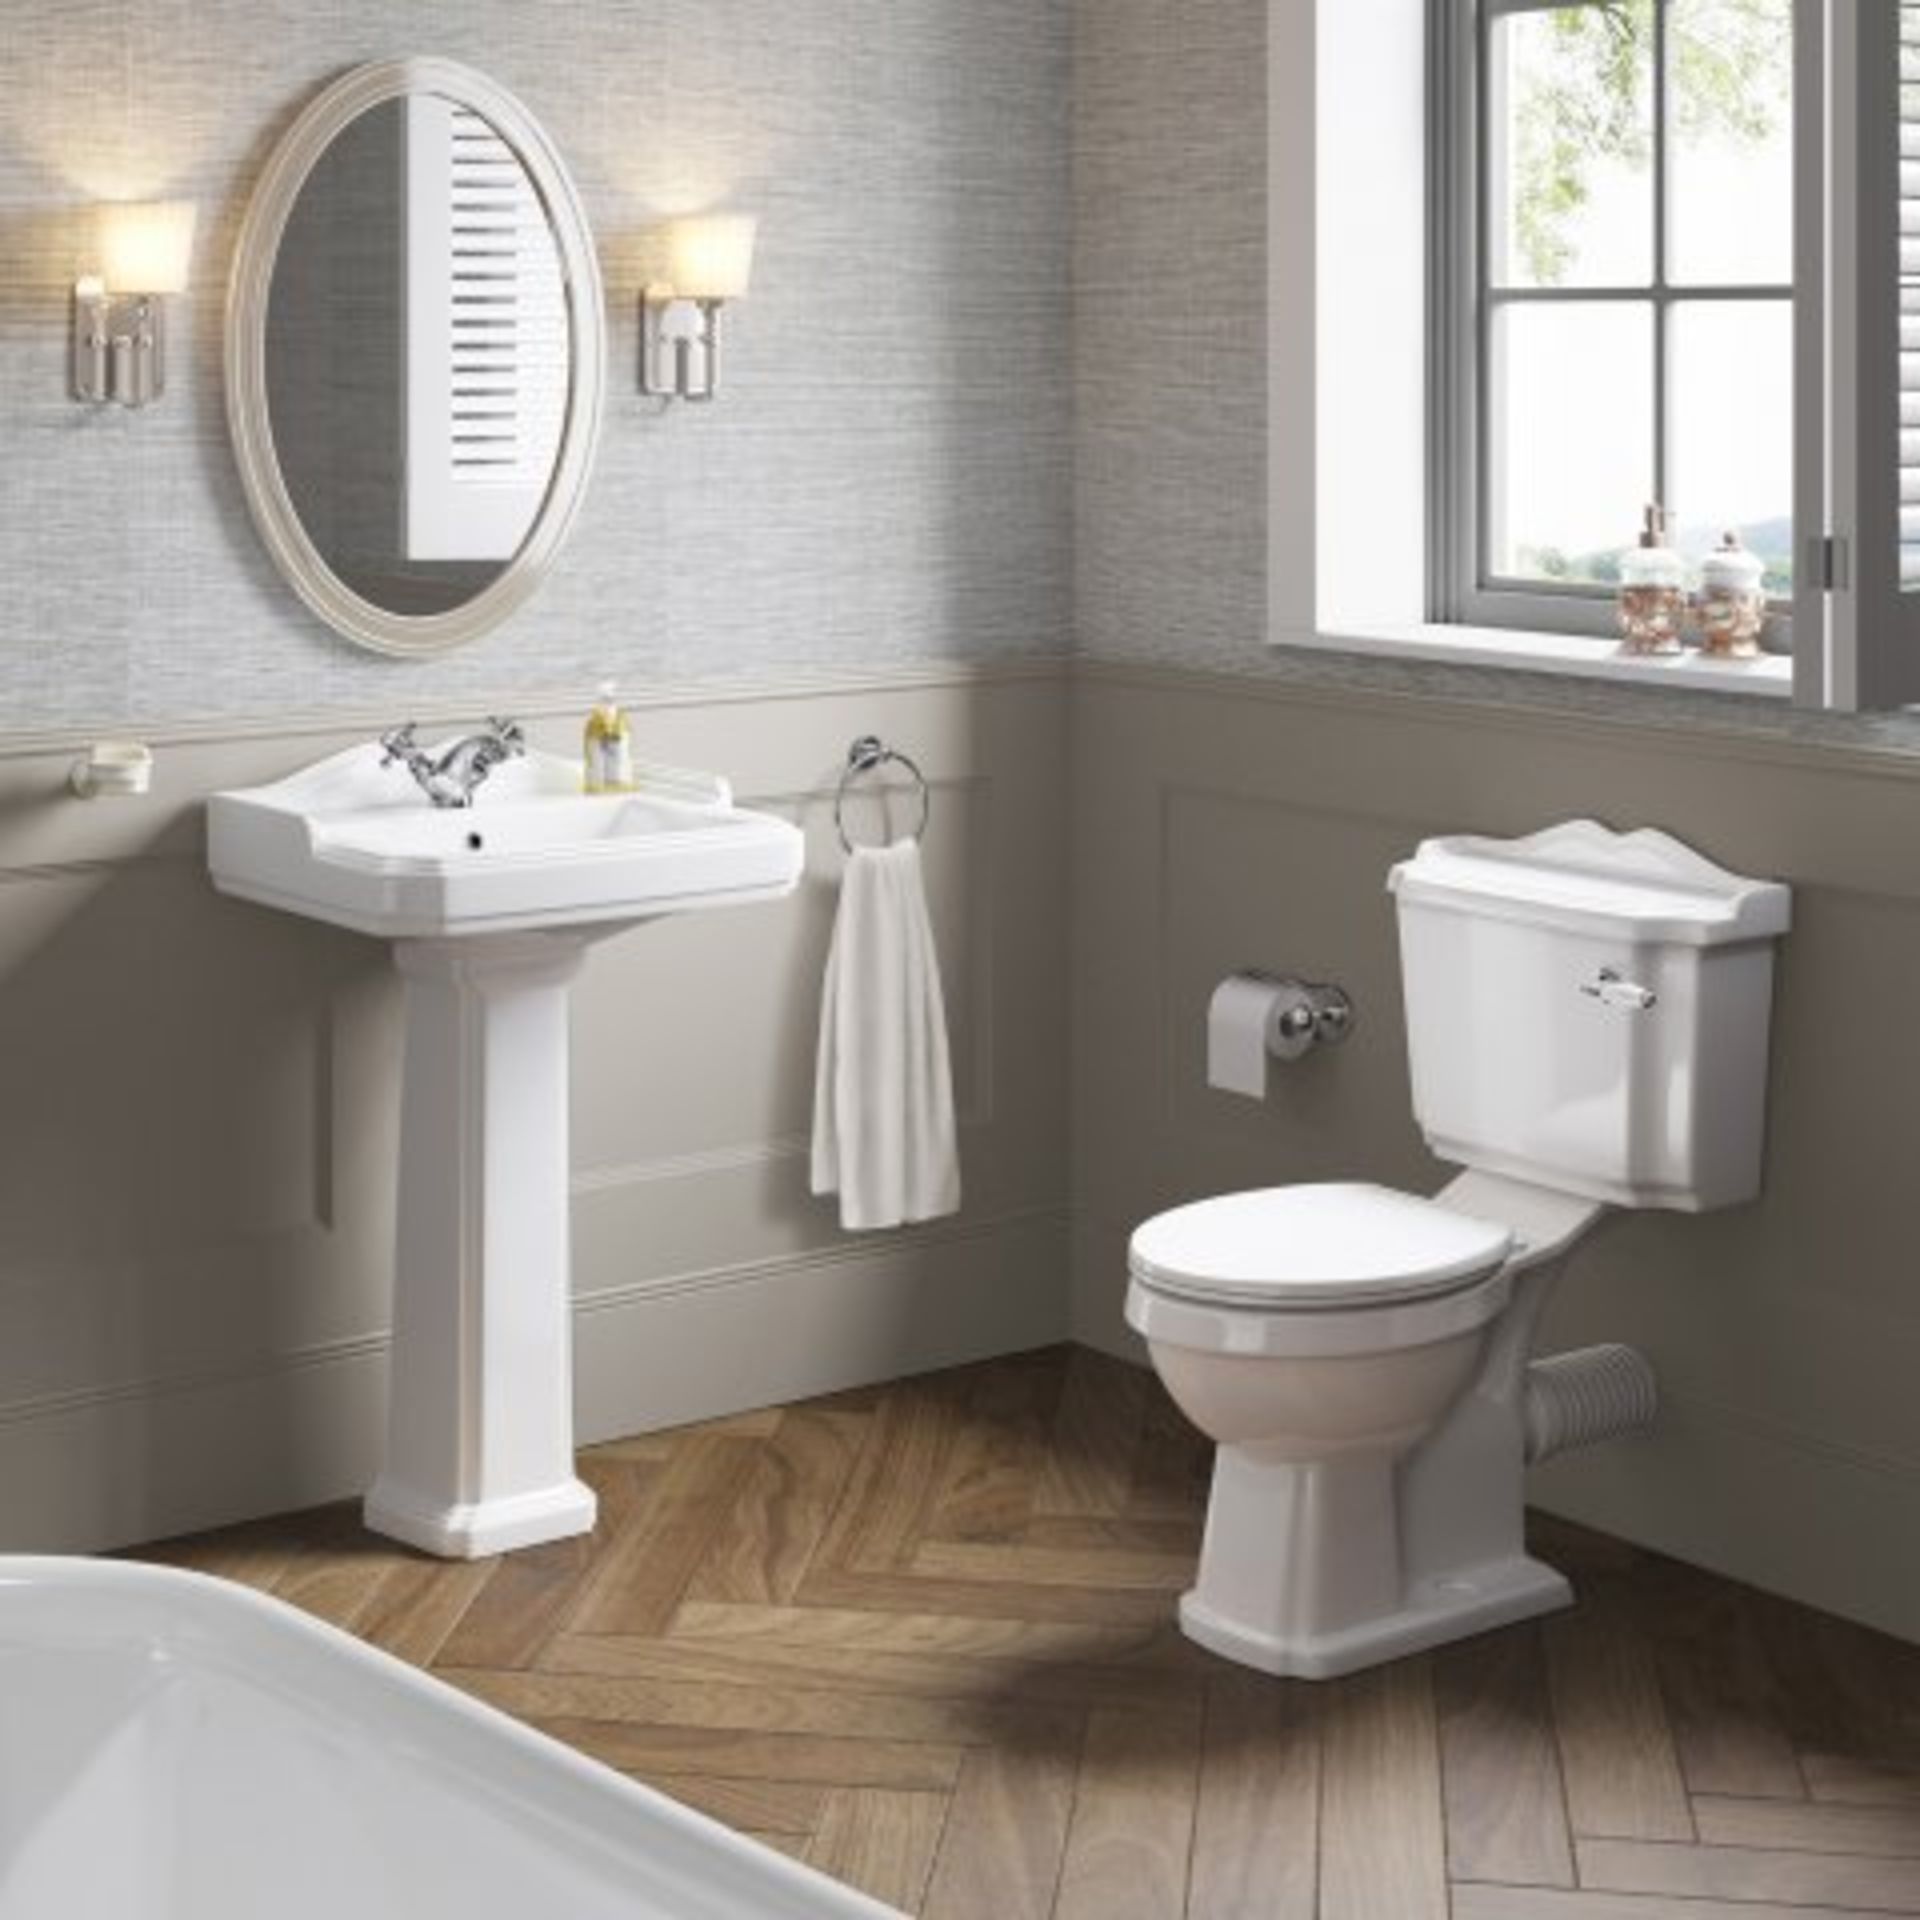 (AA218) Victoria Basin & Pedestal - Single Tap Hole. RRP £175.99. This traditional basin, - Image 2 of 4